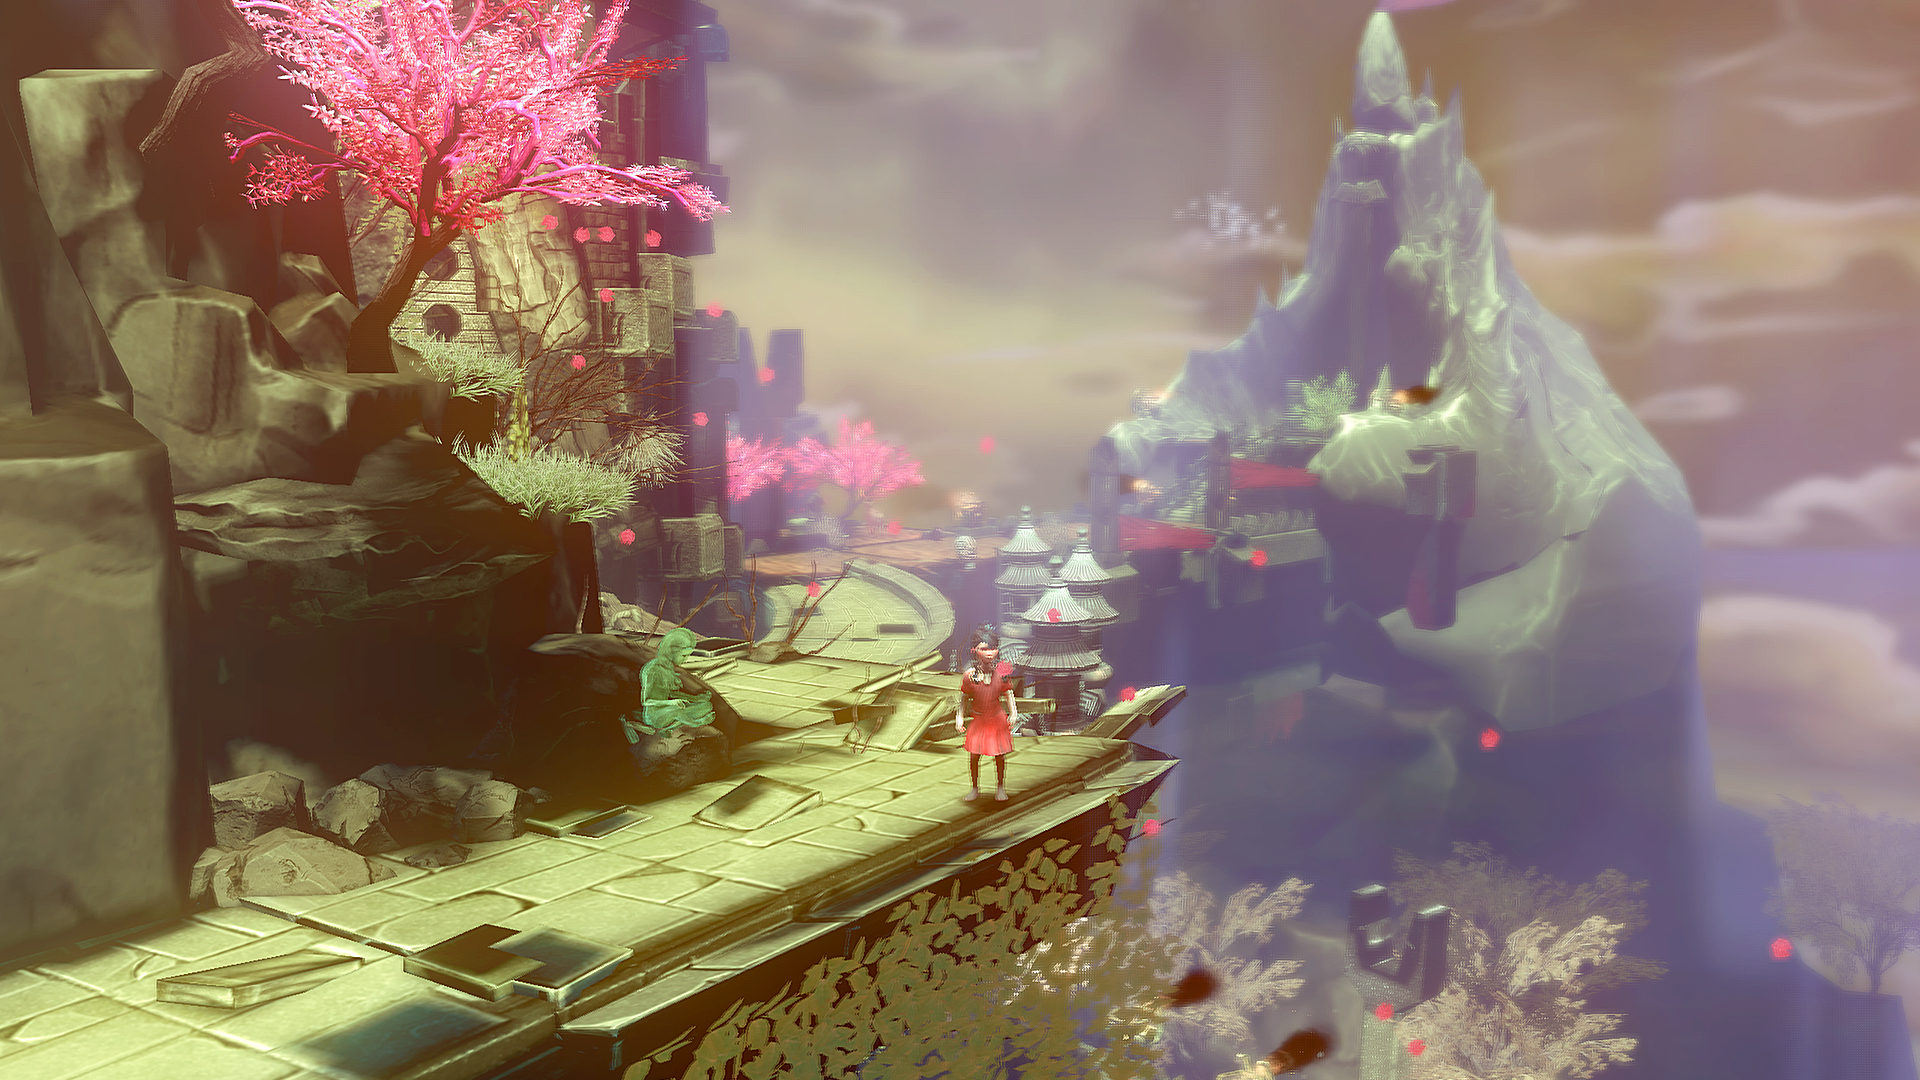 GDC 2015: Hands on Preview with Toren